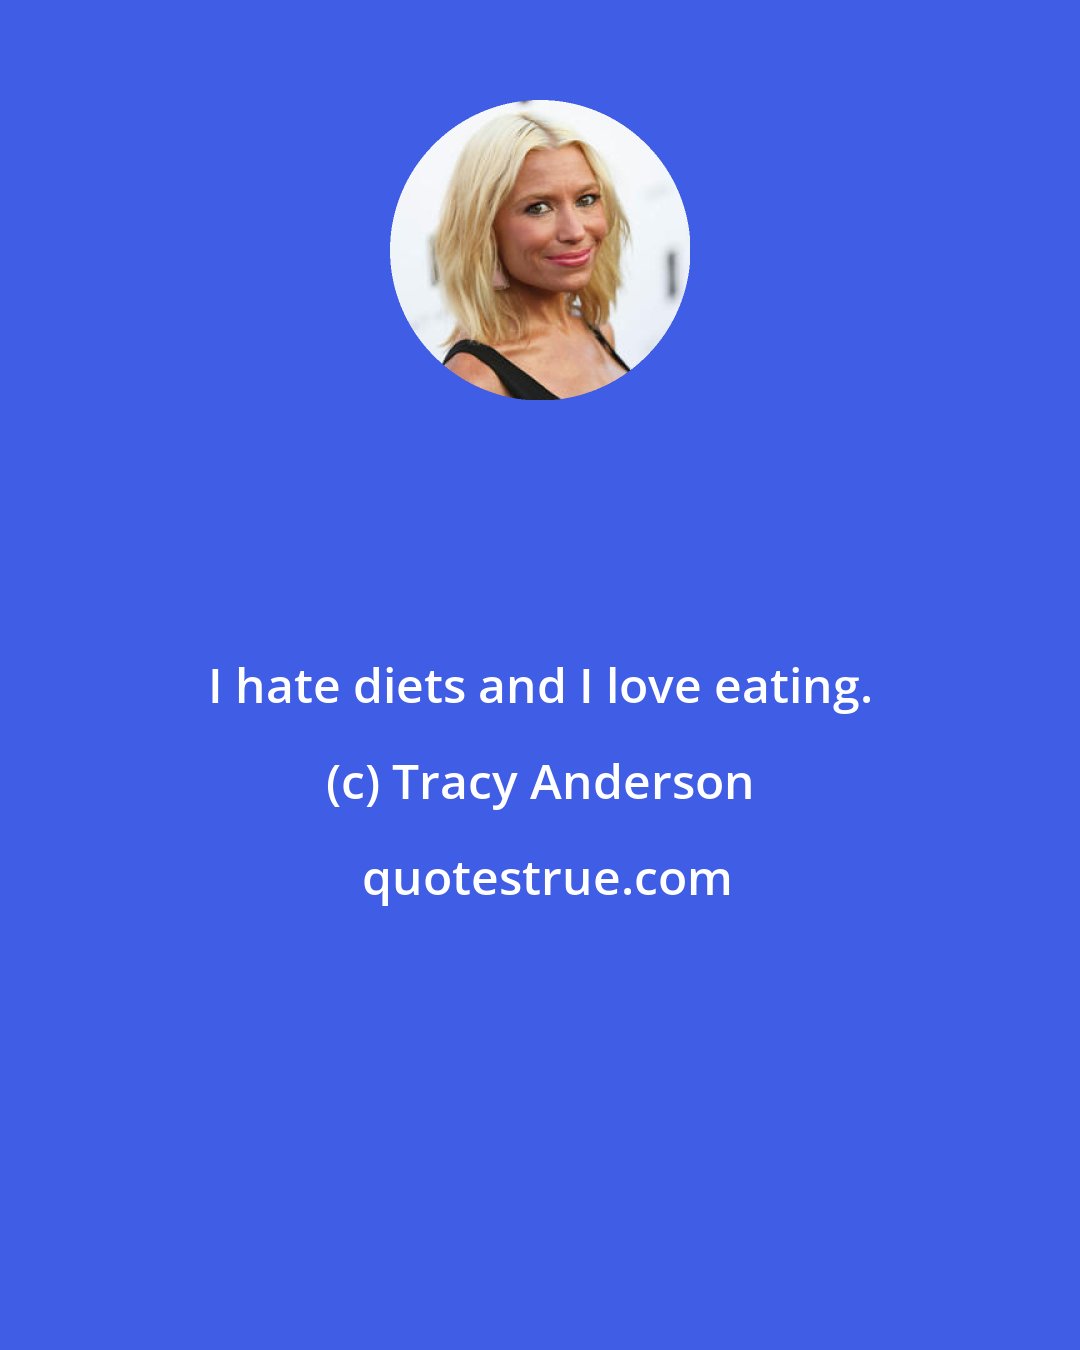 Tracy Anderson: I hate diets and I love eating.